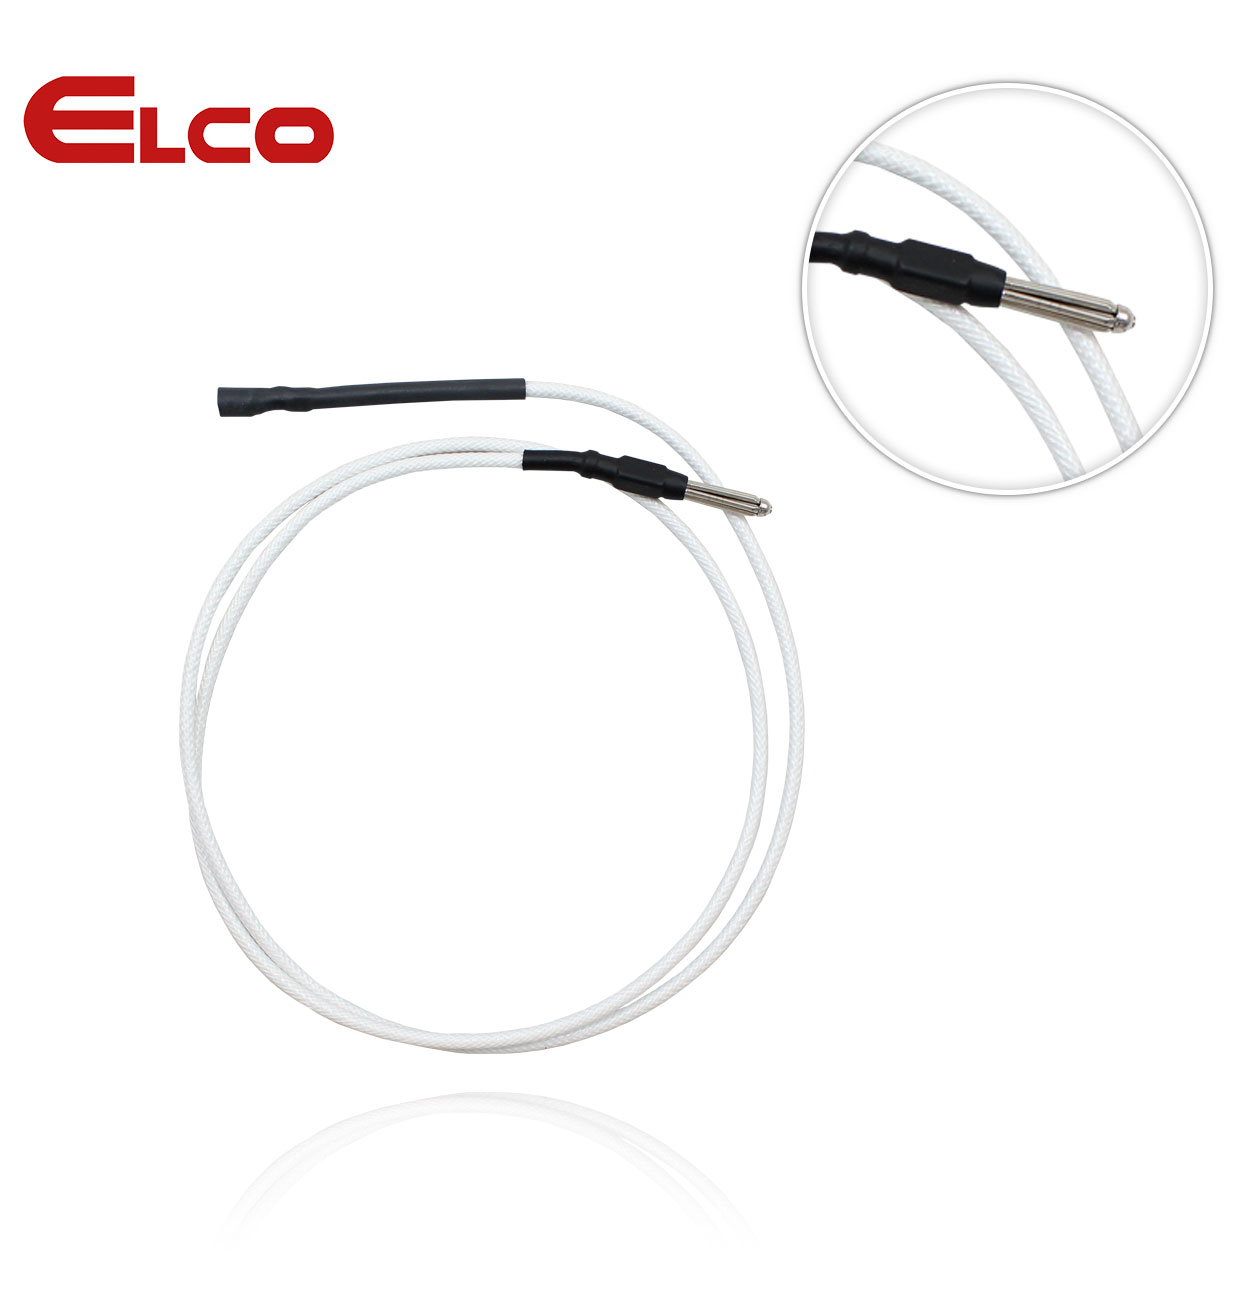 L850 ELCO IONISATION CABLE